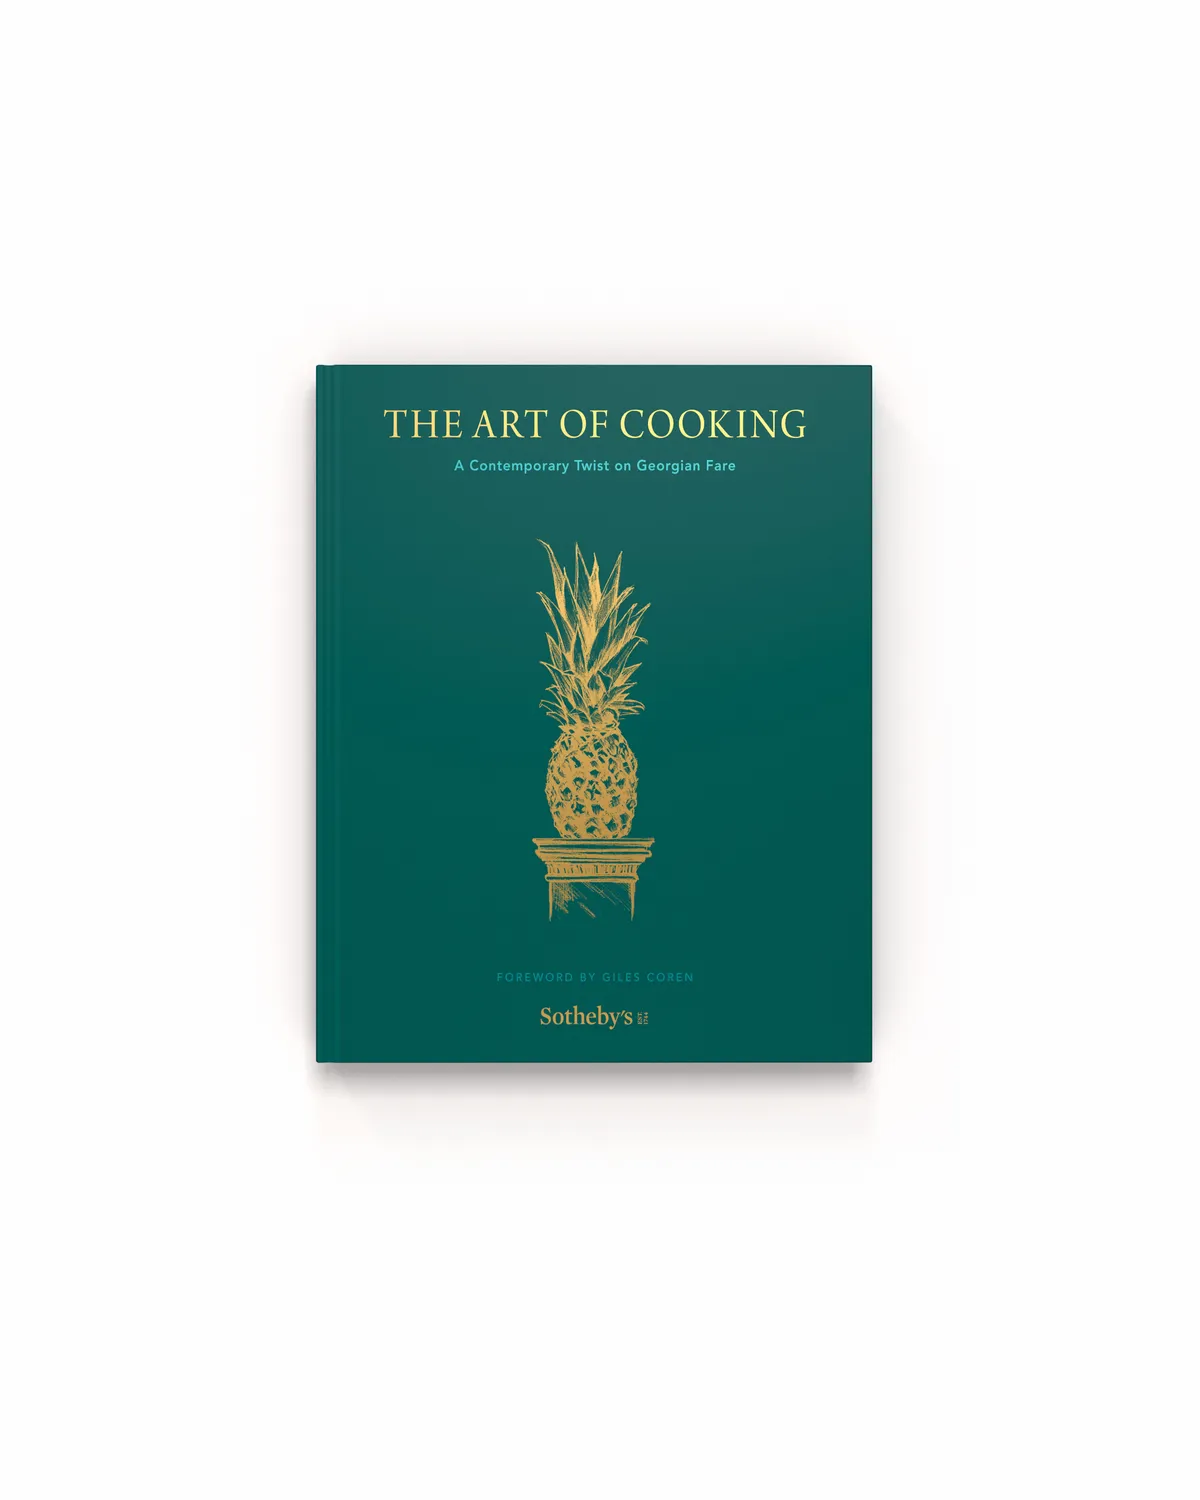 The Art Of Cooking: A Contemporary Twist on Georgian Fare